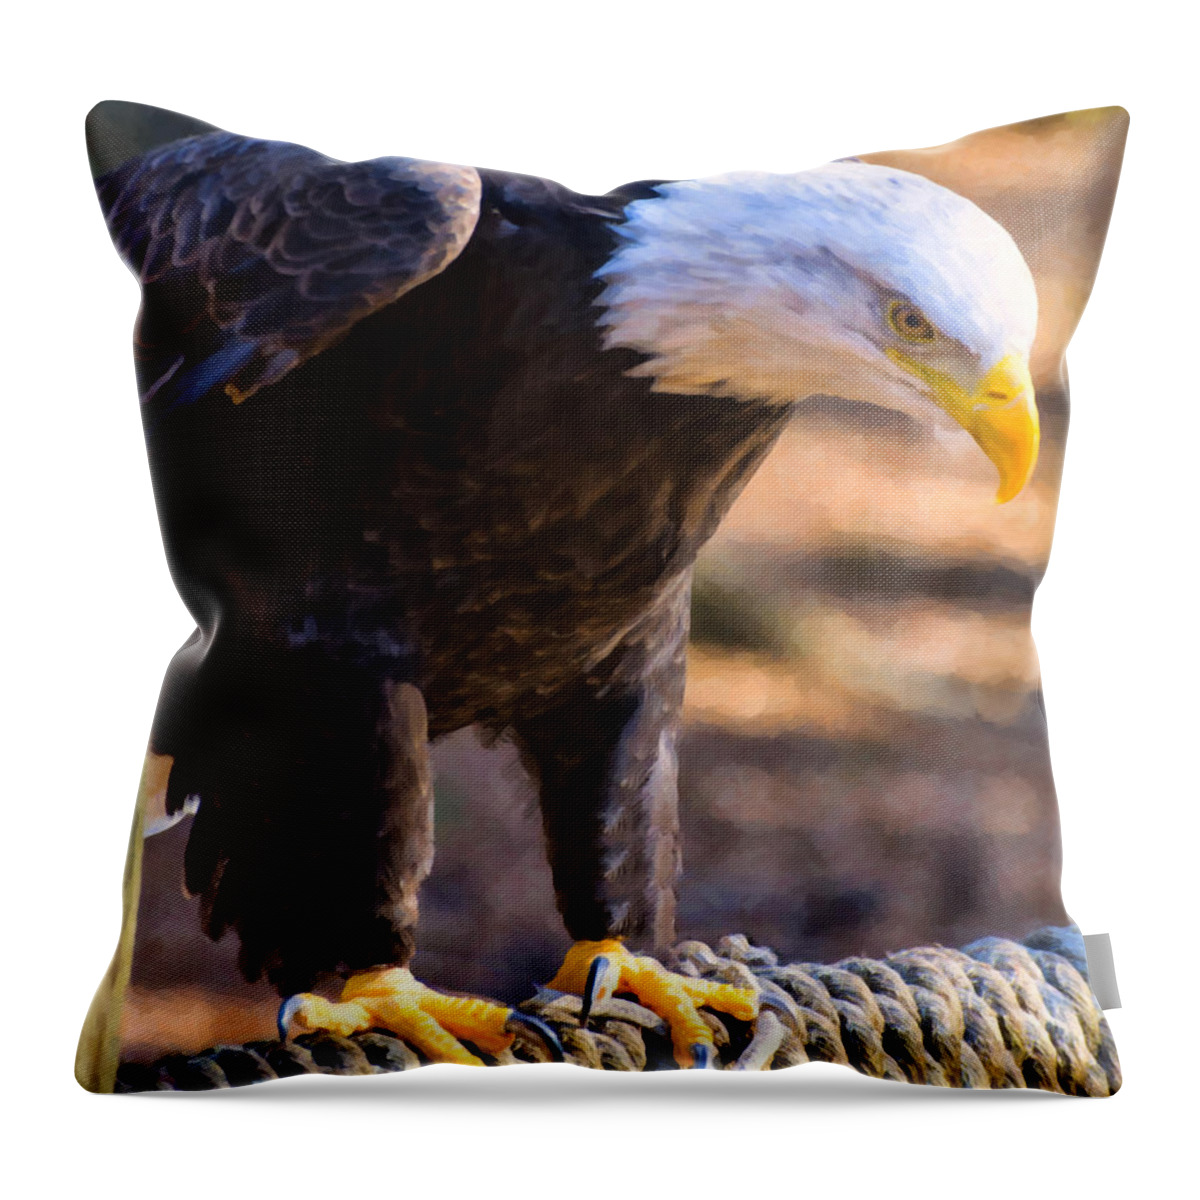 Bald Eagle Throw Pillow featuring the digital art Perched Bald Eagle by Flees Photos